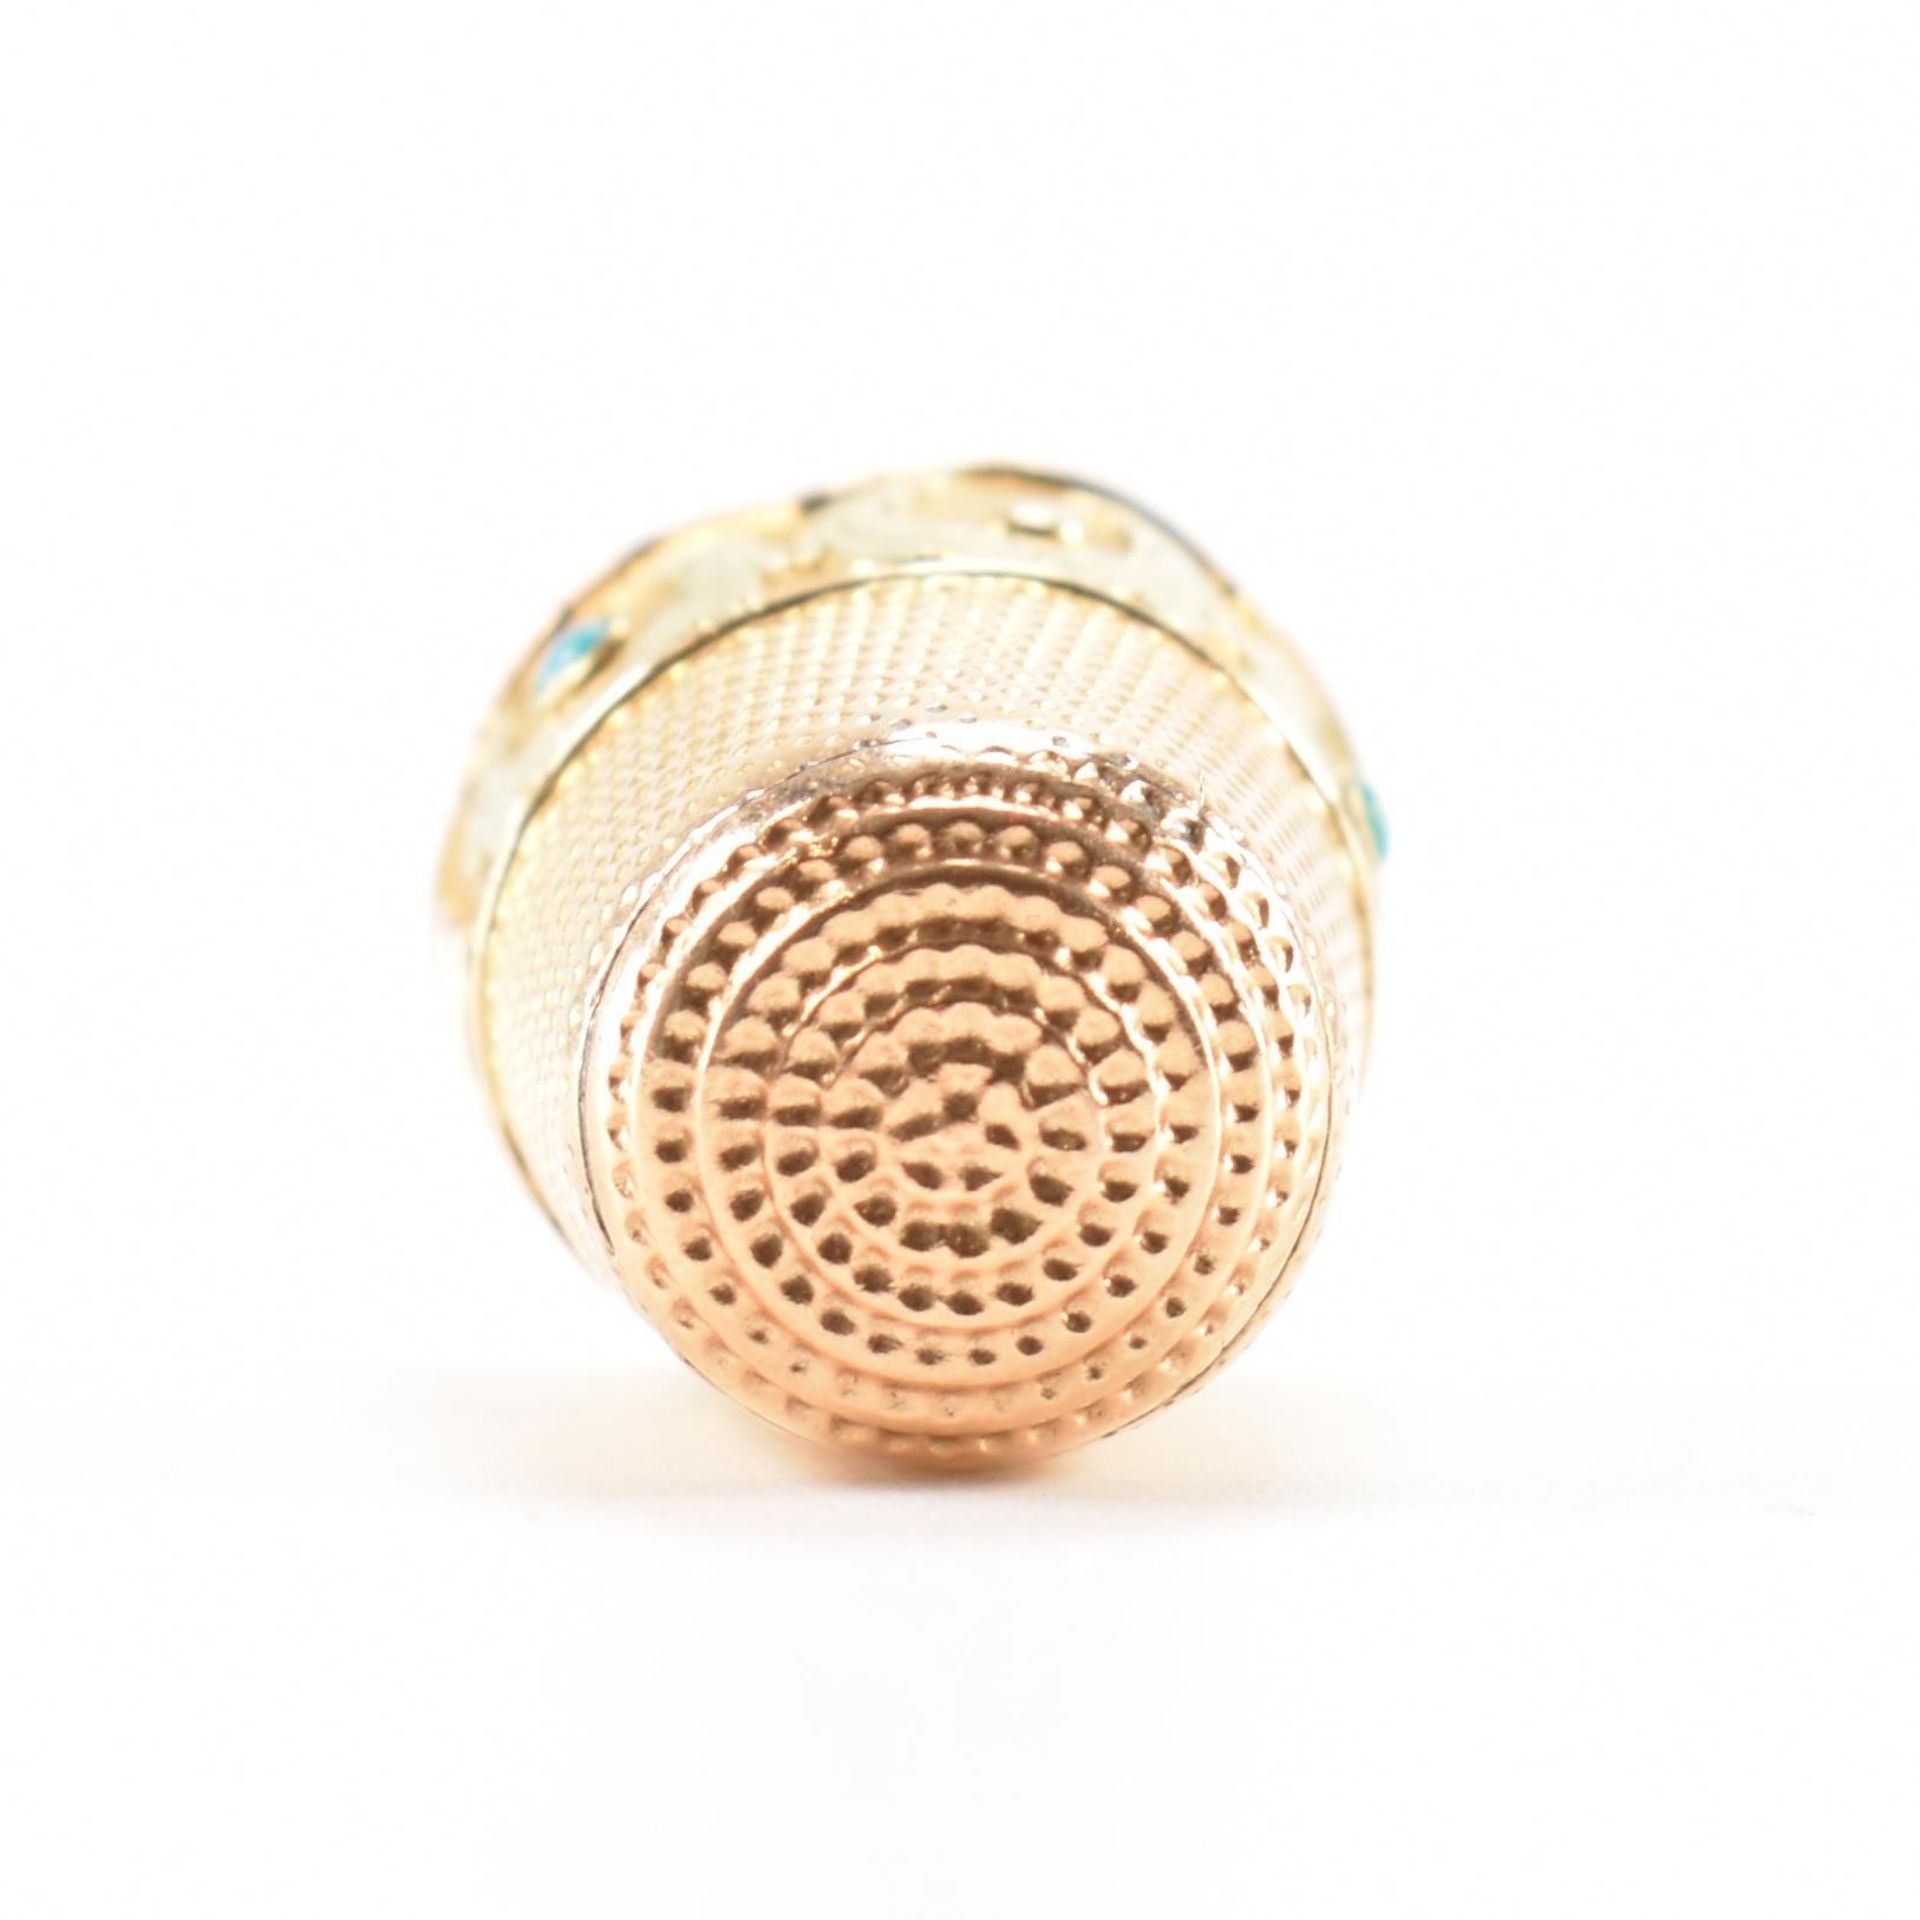 ANTIQUE GOLD & TURQUOISE THIMBLE - Image 5 of 7